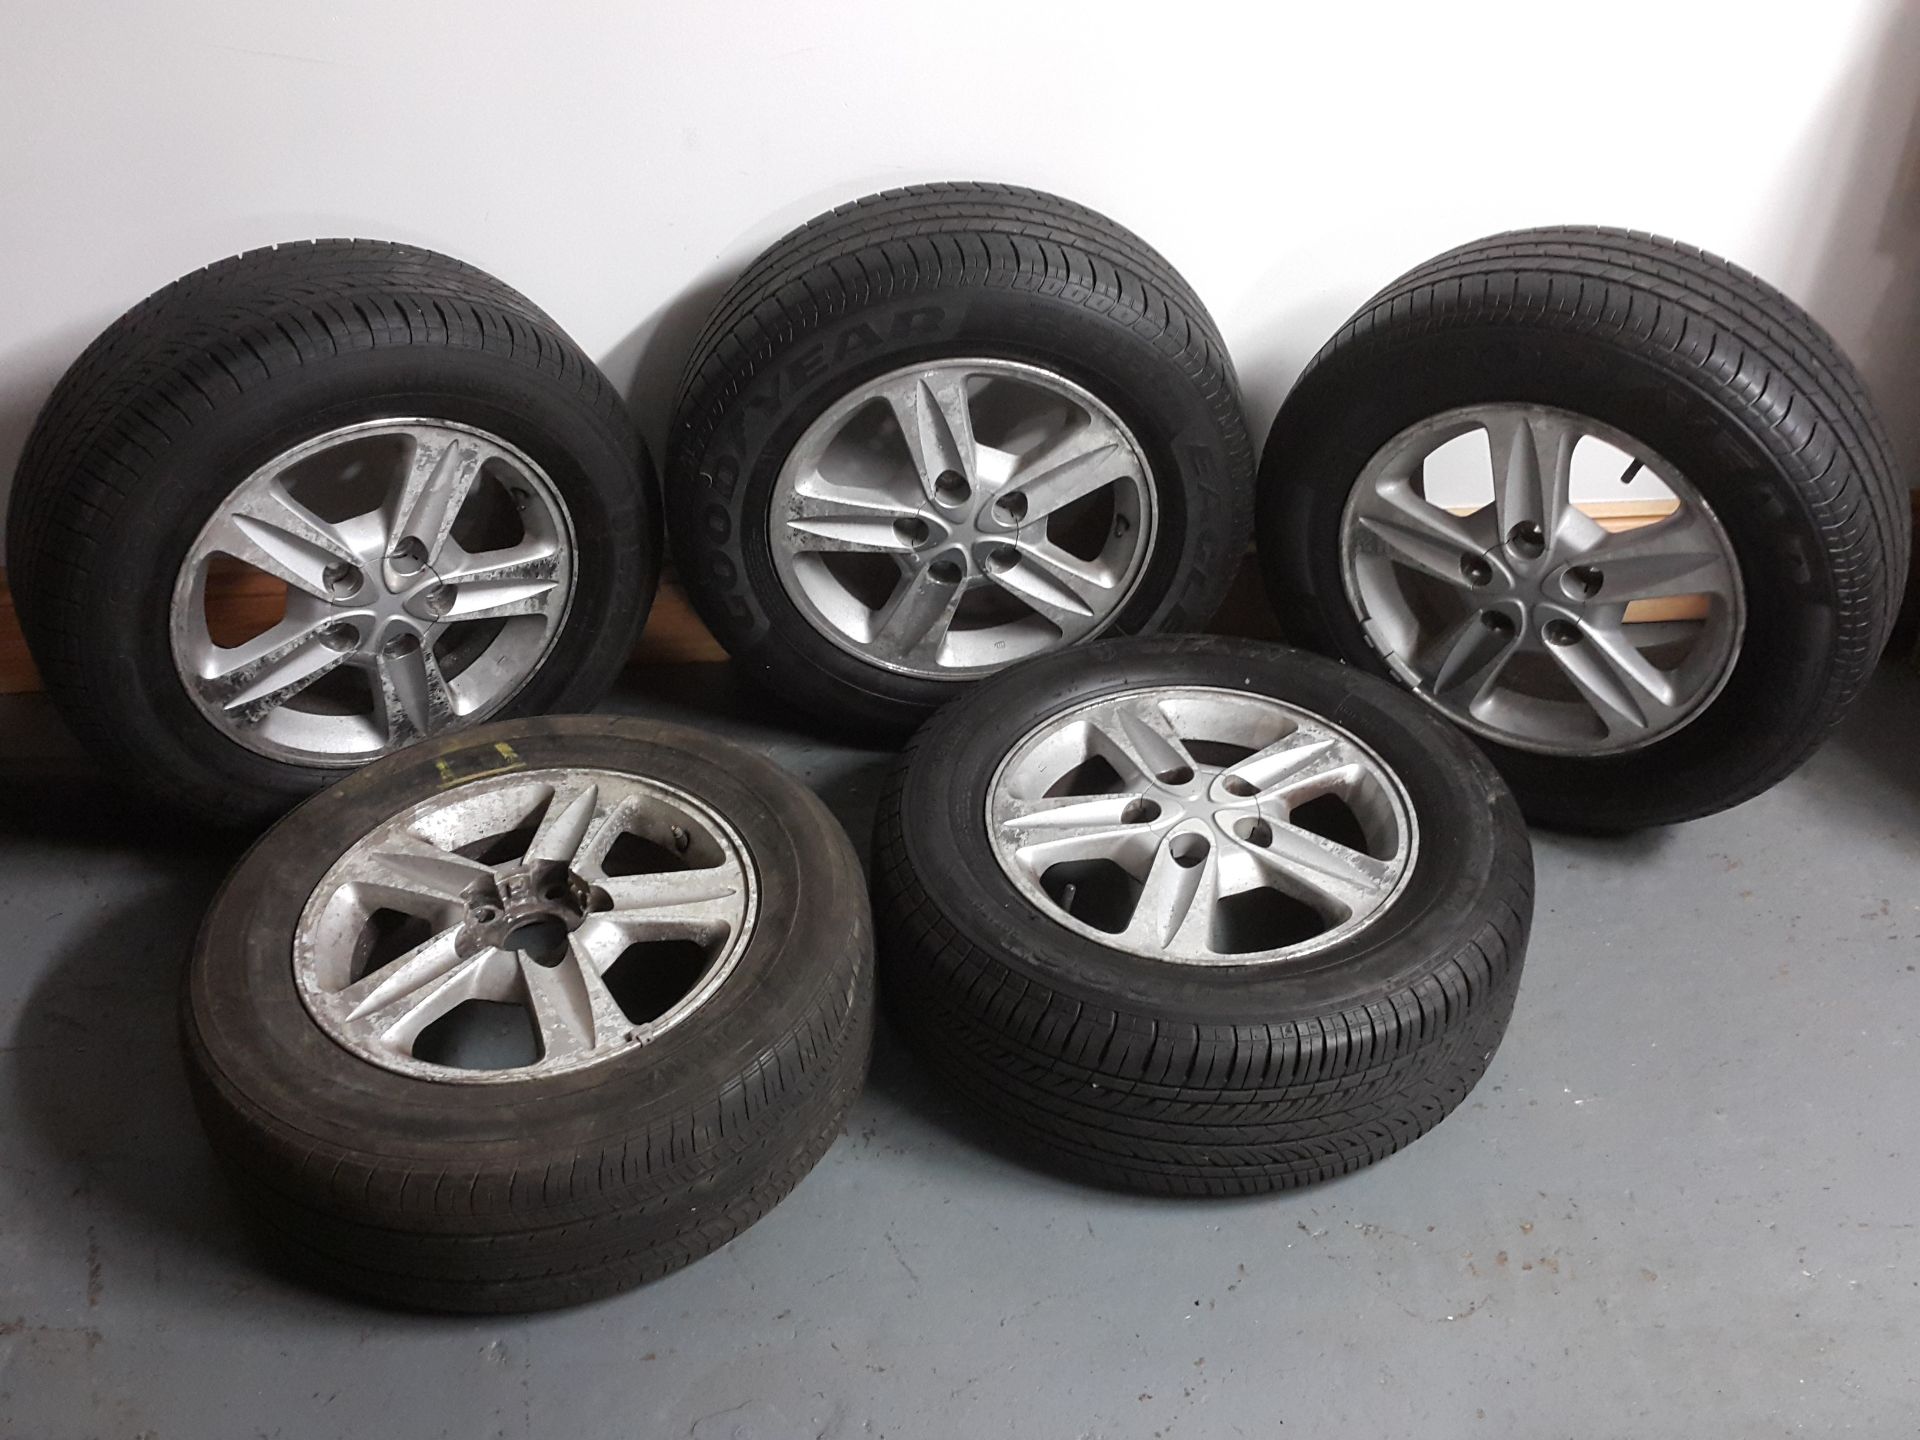 5 X TOYOTA PREVIA 15" ALLOY WHEELS WITH TYRES 205/65/15 (2 GOODYEAR 2 OTHERS)